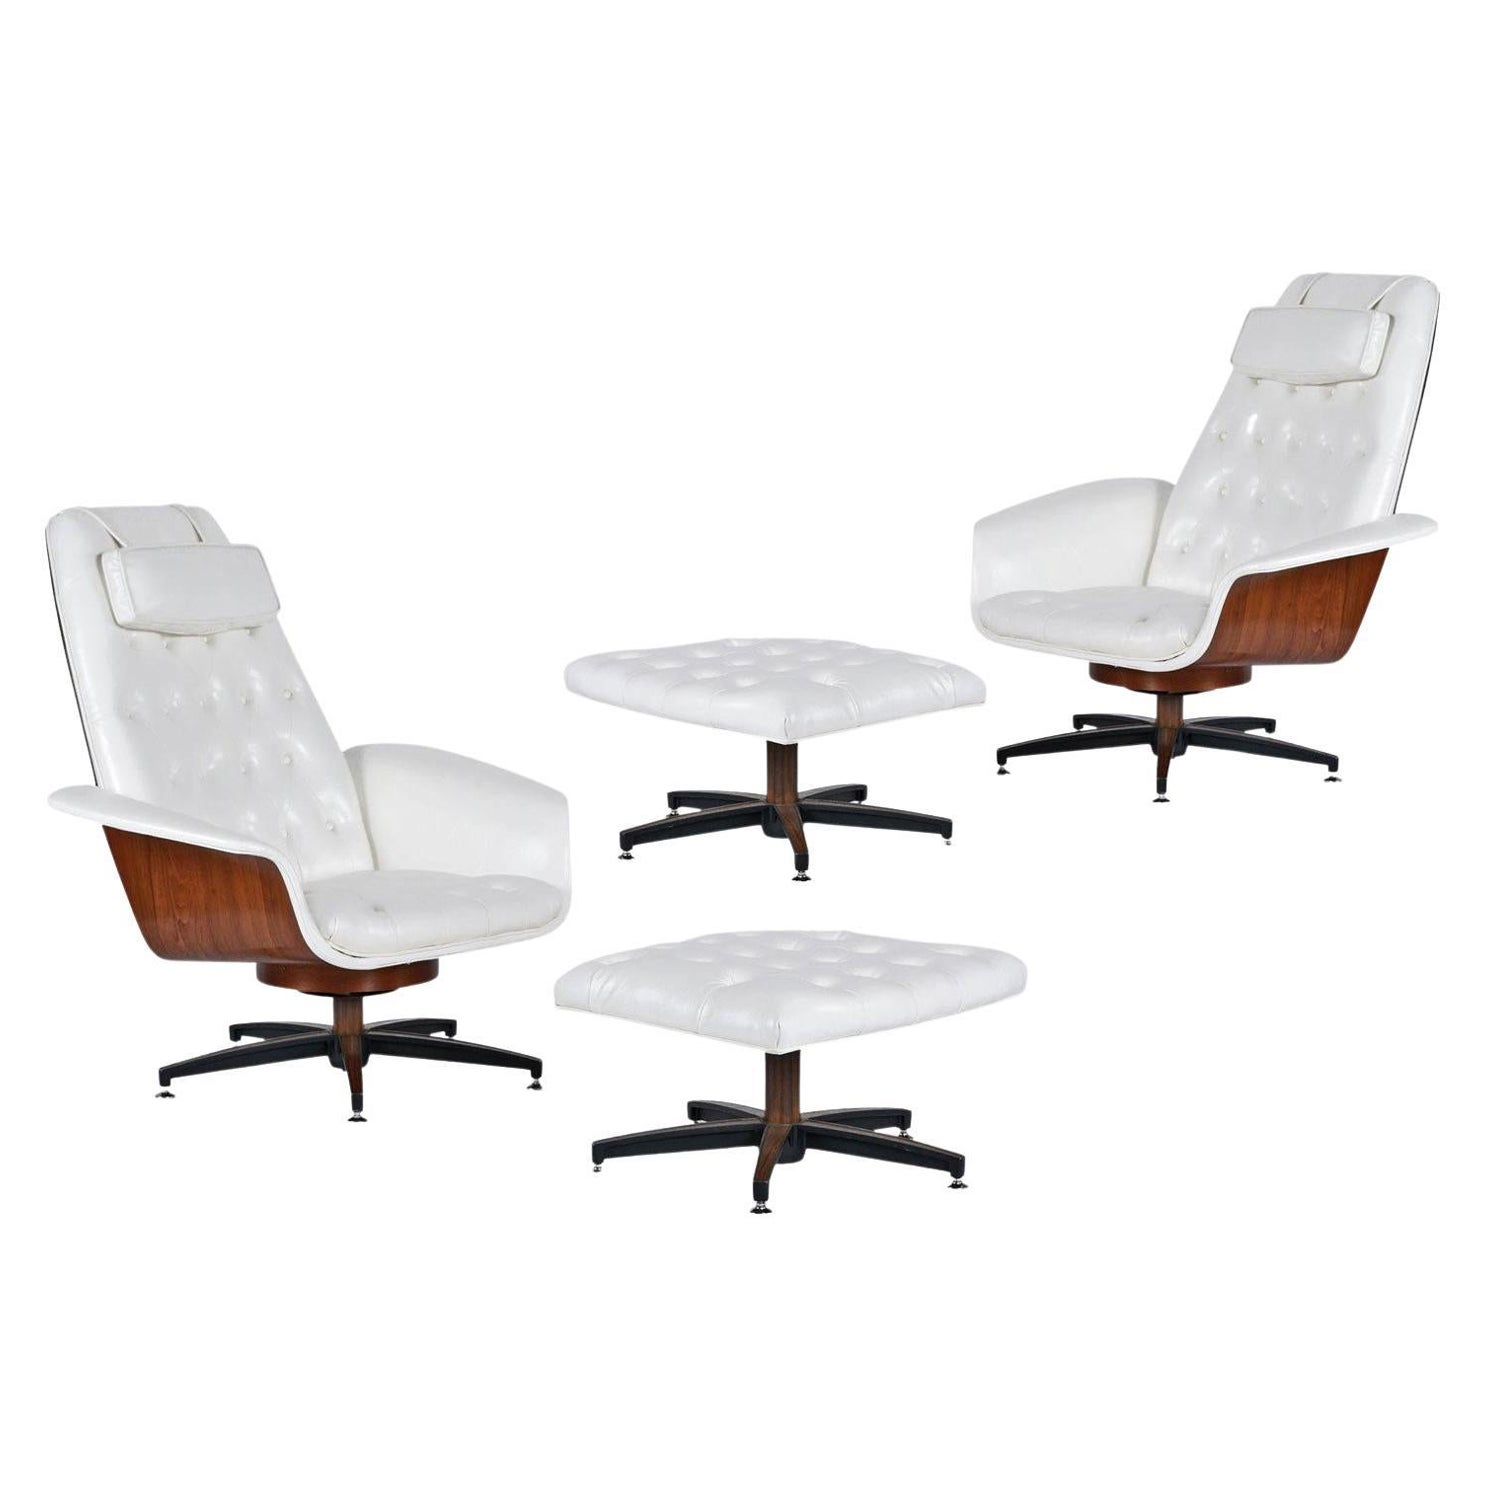 There's something indescribably awesome about these Mulhauser chairs in tufted white upholstery. Cool, casual and comfortable in their skin. Anywhere they go, is exactly where they're supposed to be. If these chairs became sentient, they would ask